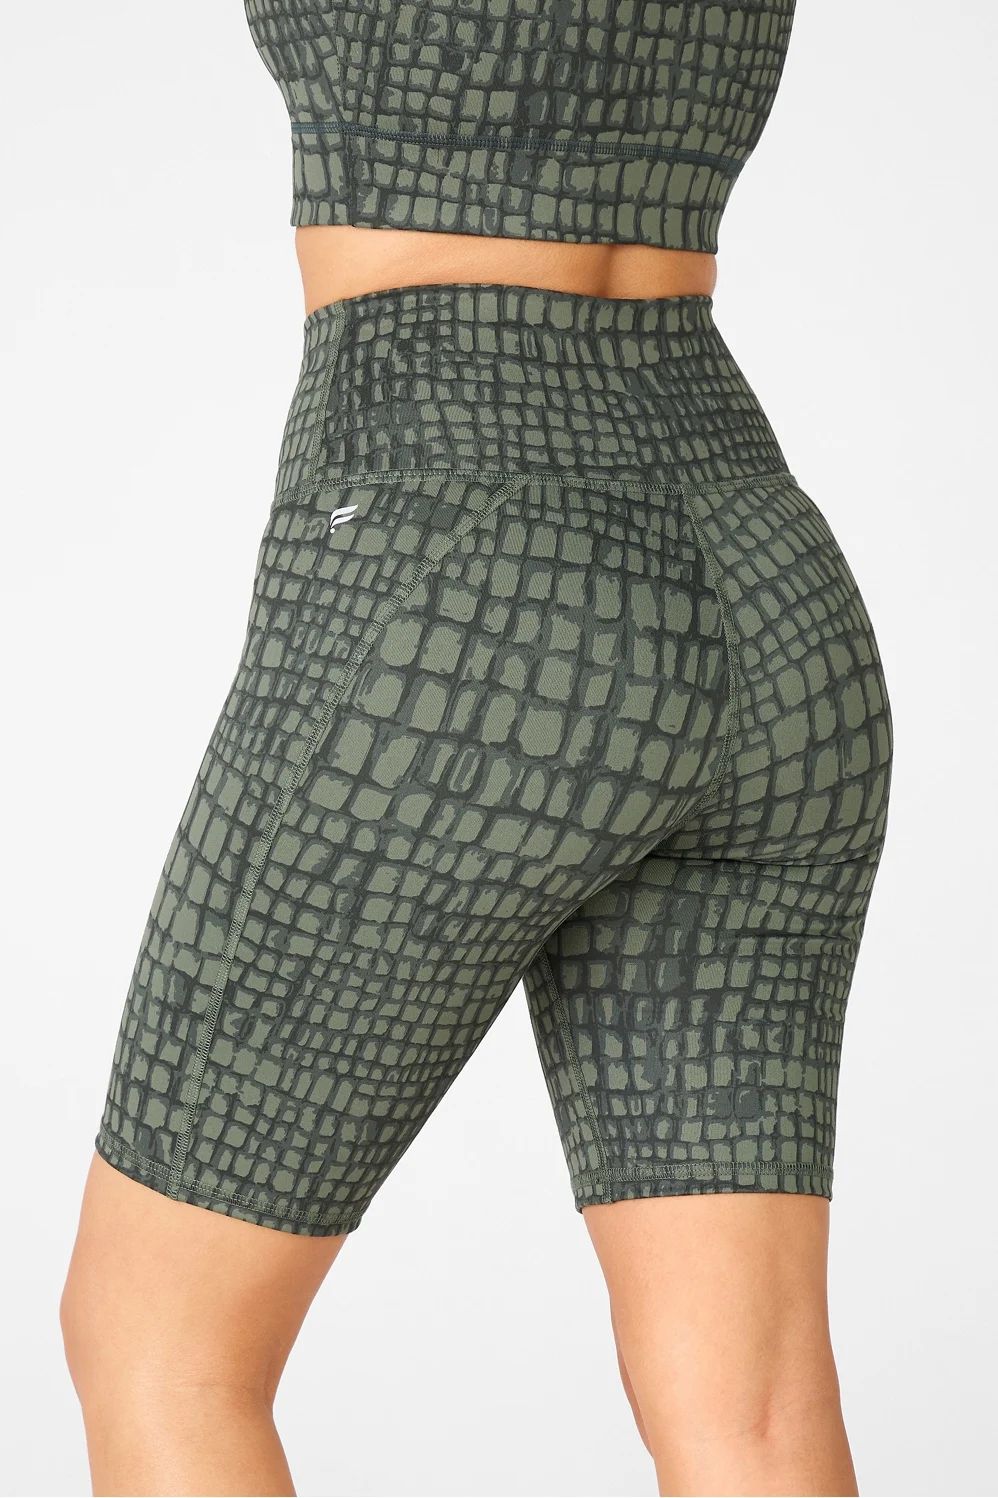 High-Waisted Printed PowerHold® Short 9 | Fabletics